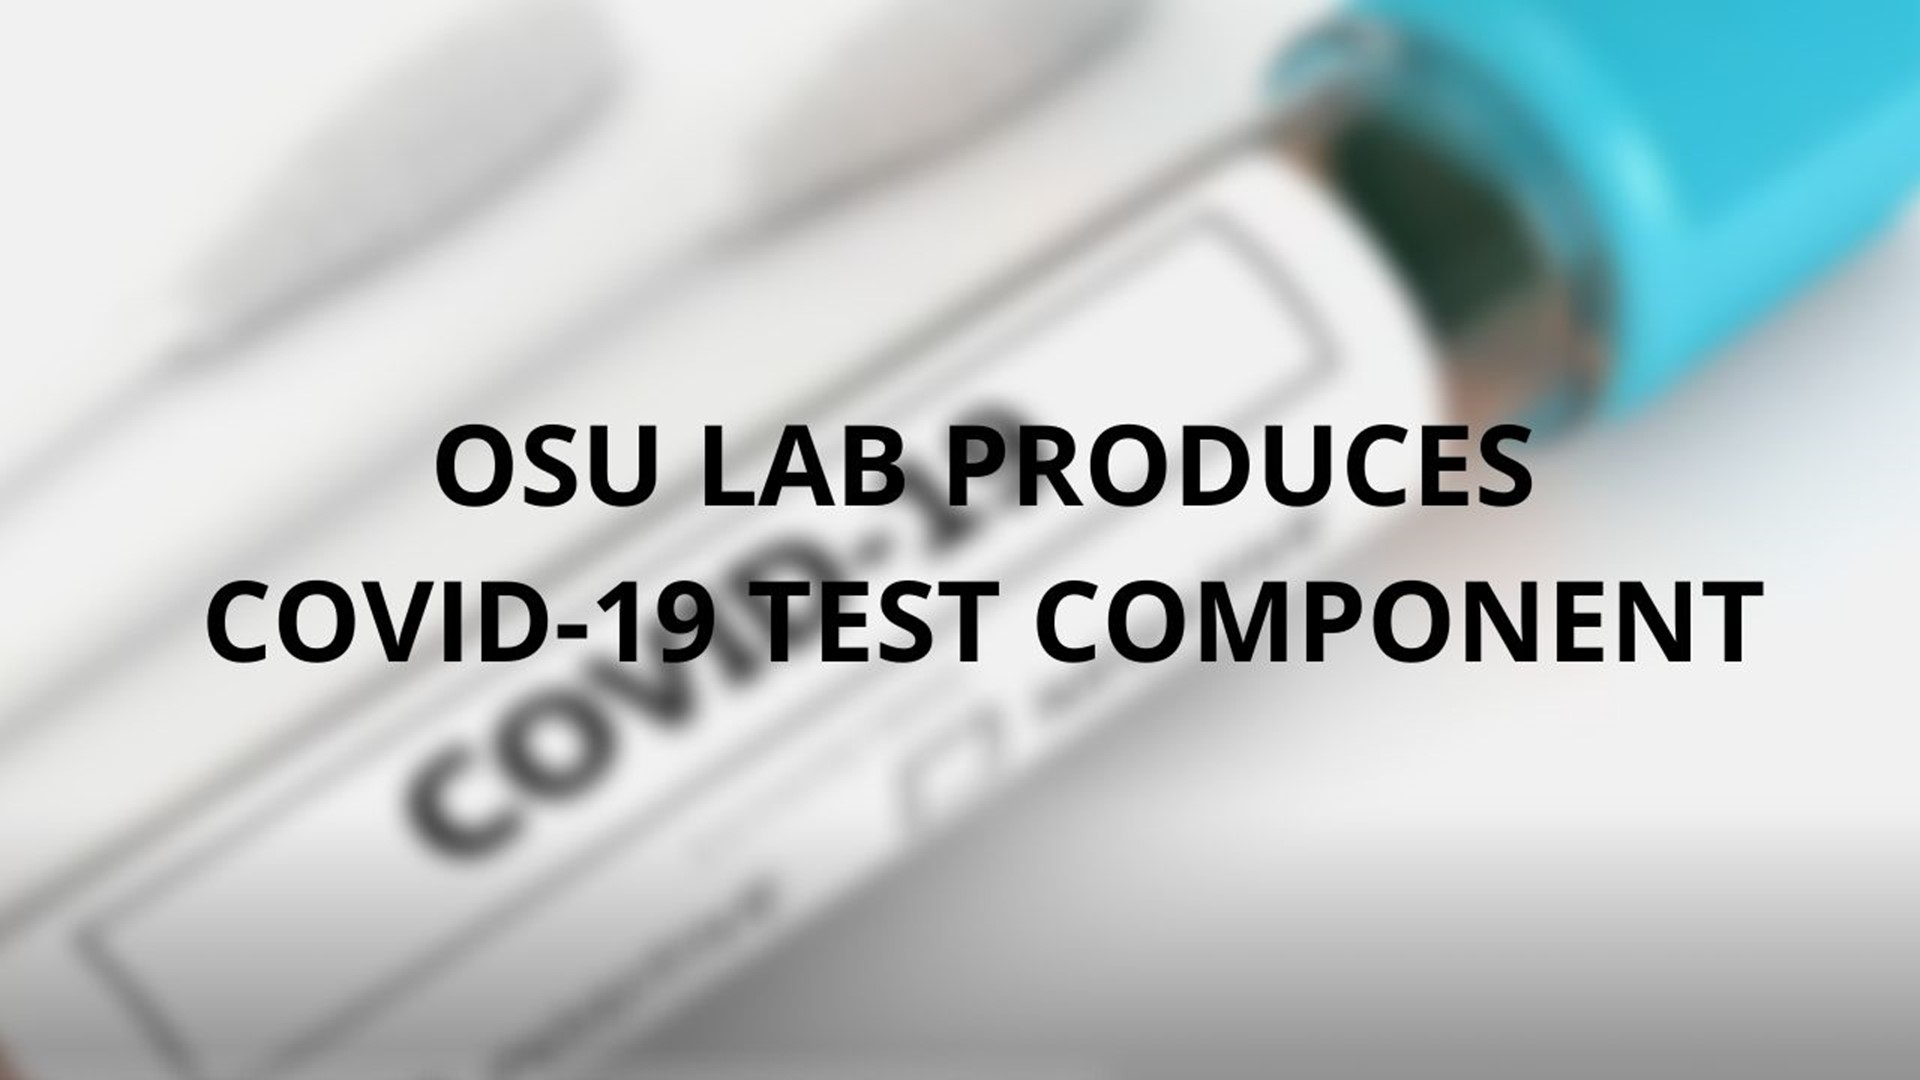 A lab at Oregon State University is producing a component for a COVID-19 test